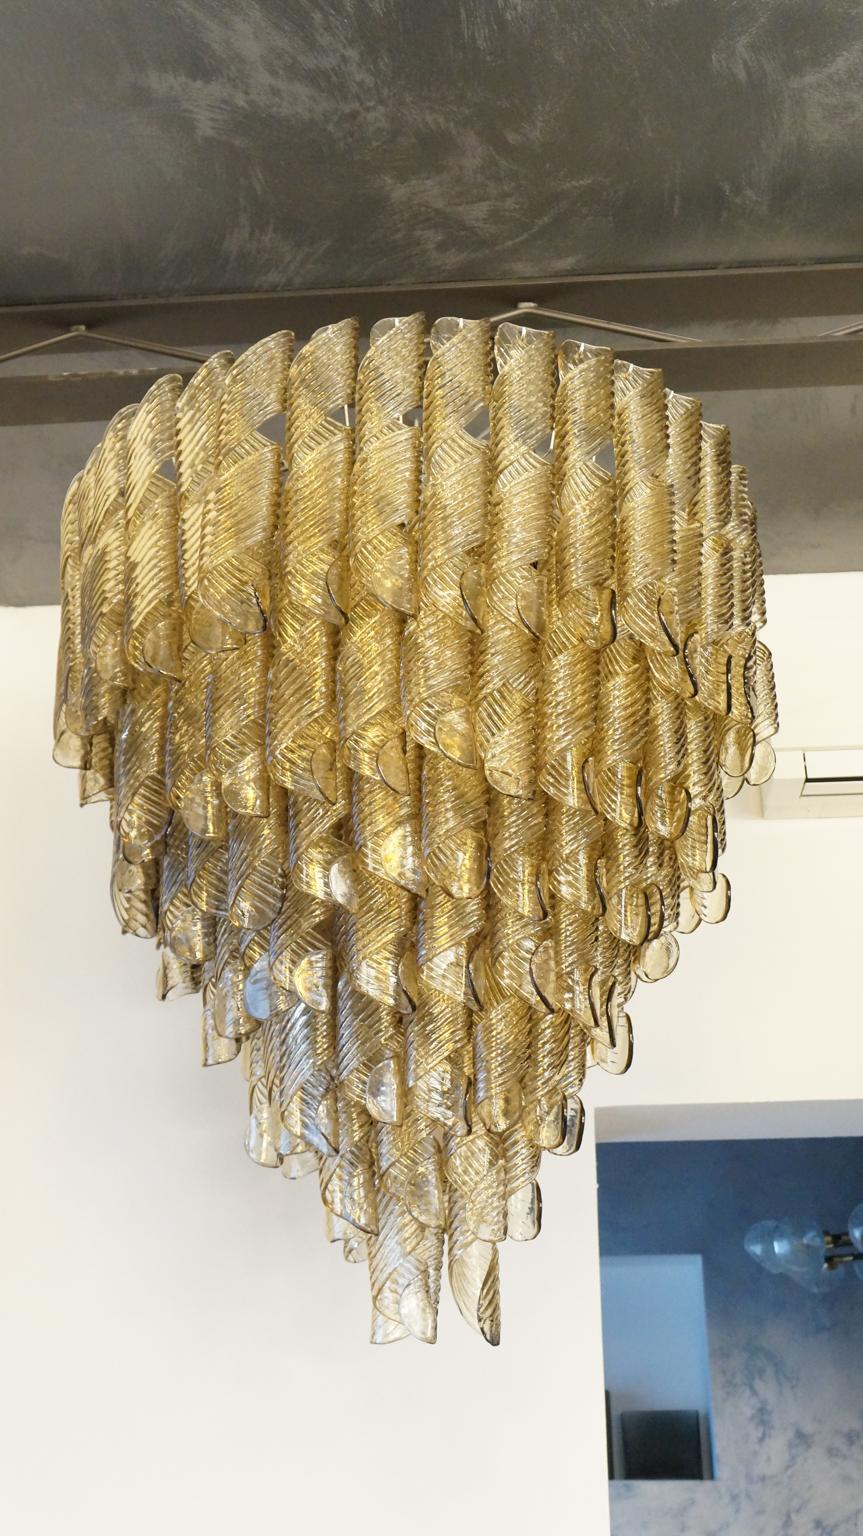 Designed in 1988 by Vistosi, this vintage chandelier consists of 134 Murano glass elements, which is certainly not a few number. Moreover, they feature this particular fume color, a rather elegant and fine shade of brown. It is adorned with 13 light